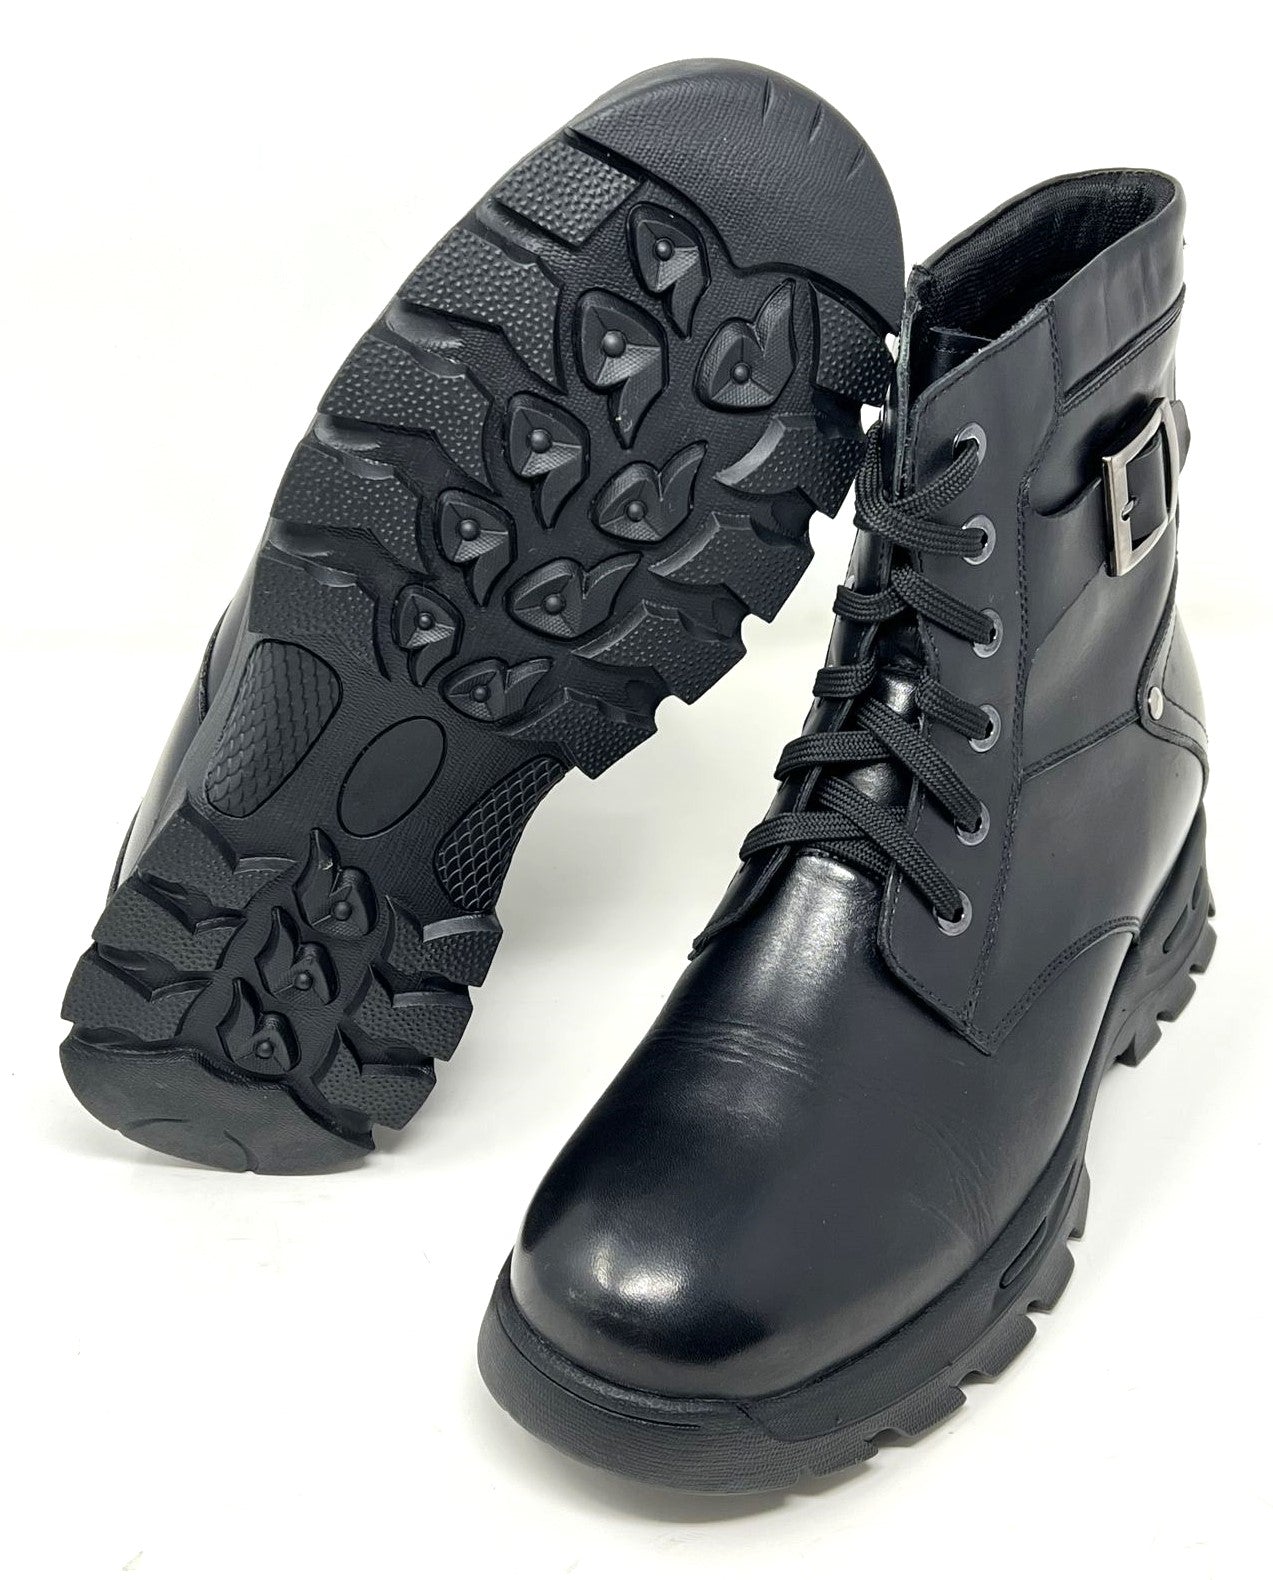 FSY0083 - 3.2 Inches Taller (Black) - Size 11.5 Only